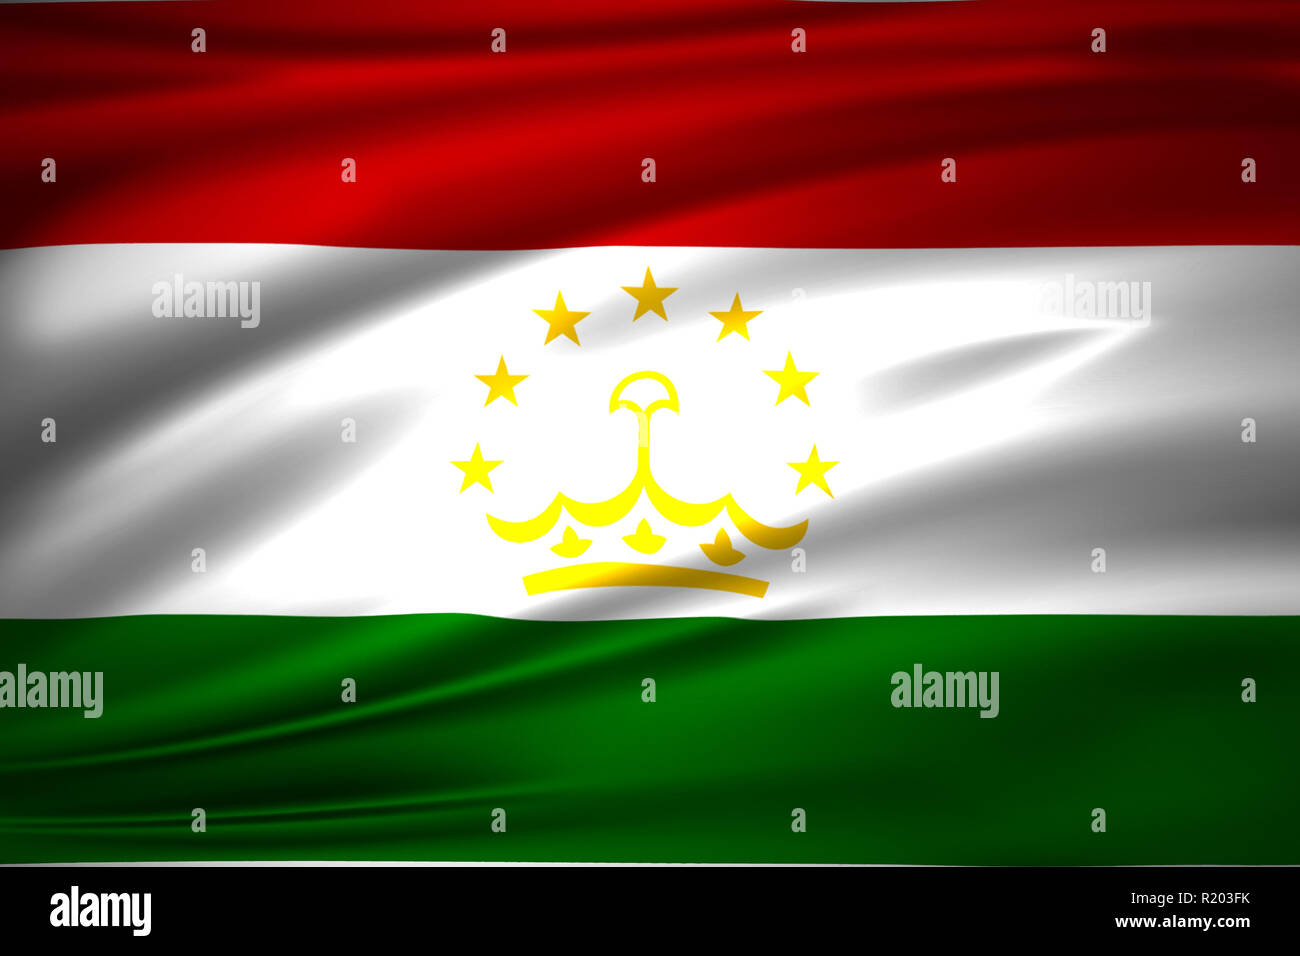 Tajikistan 3D waving flag illustration. Texture can be used as background. Stock Photo